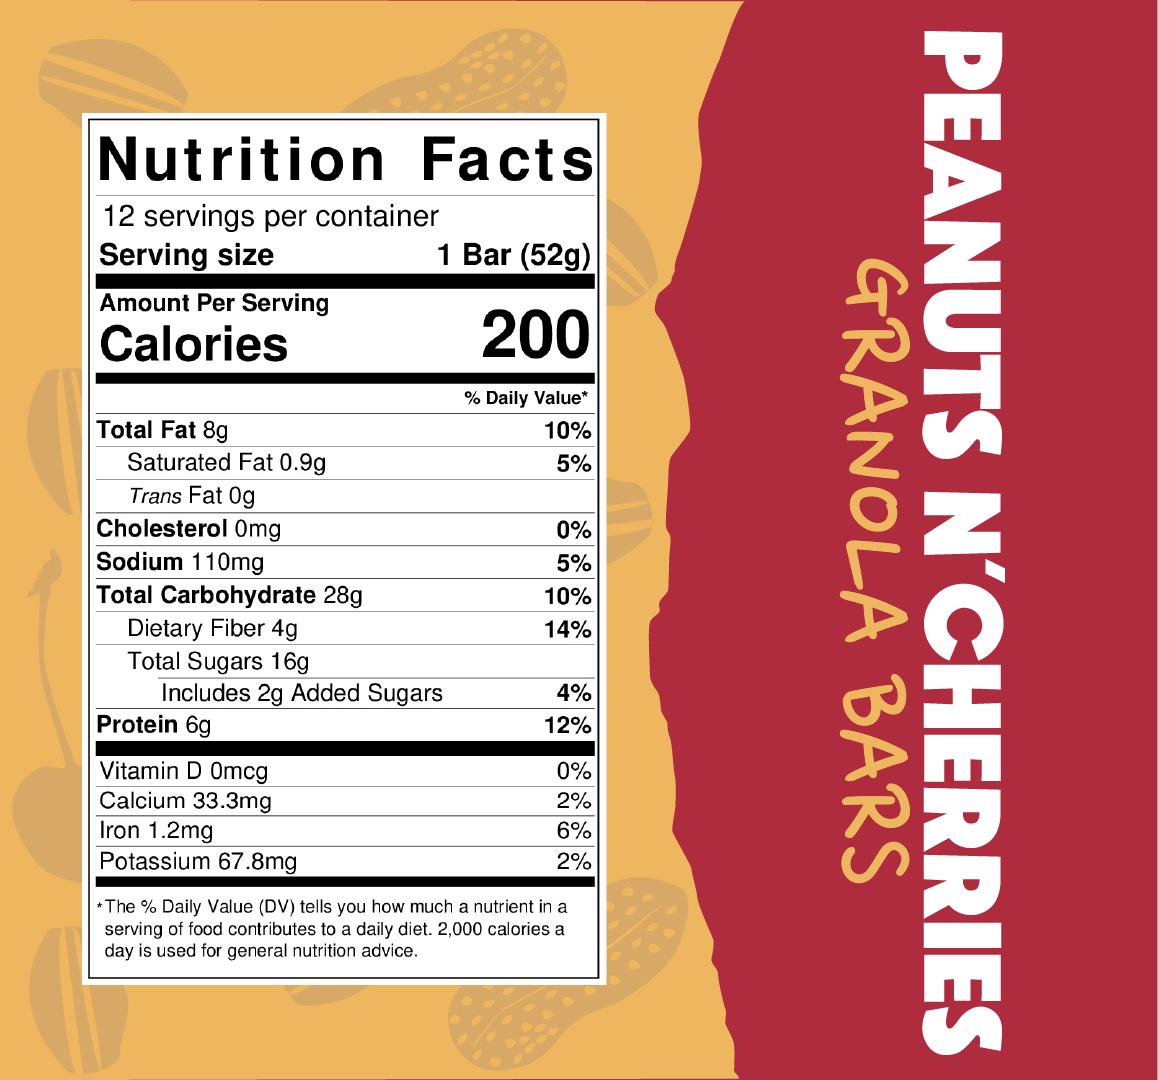 Peanuts and cherries nutrition facts